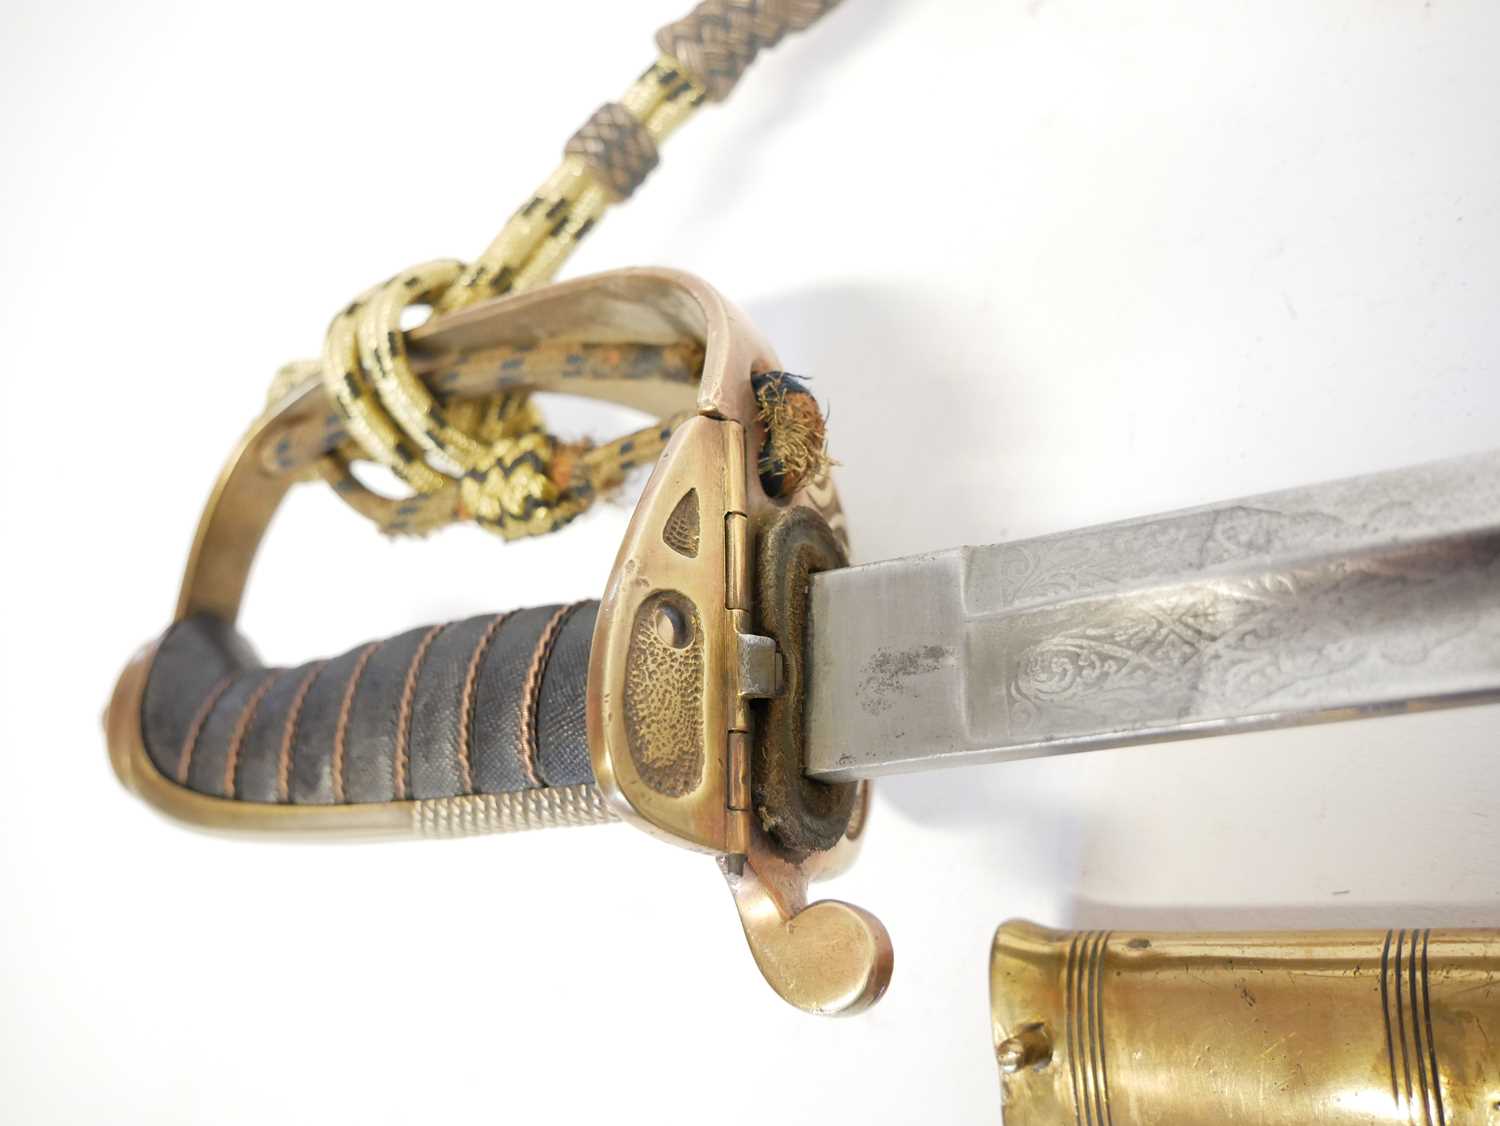 Royal Navy Petty Officer's sword, similar to an 1827 Naval sword but without the lion head pommel, - Image 11 of 16